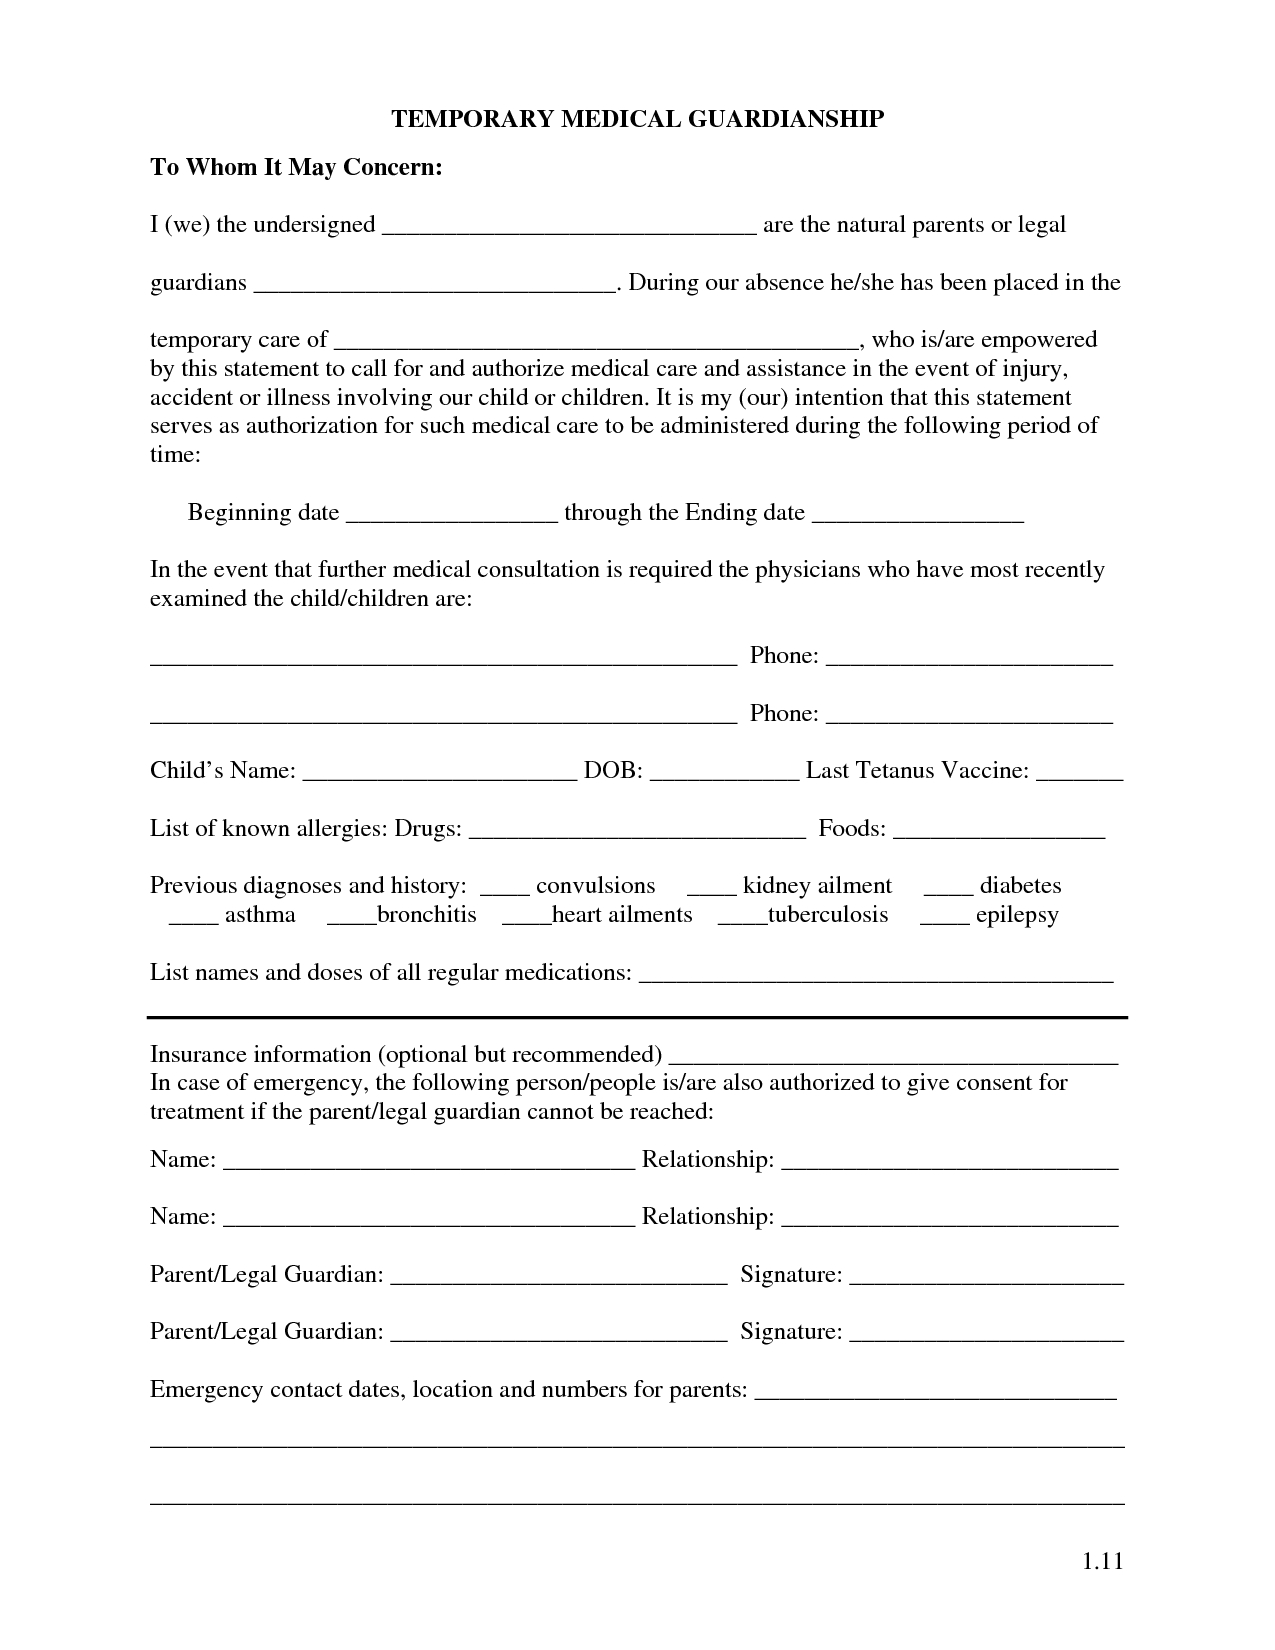 Free Printable Temporary Guardianship Forms | Forms - Free Printable Child Custody Papers